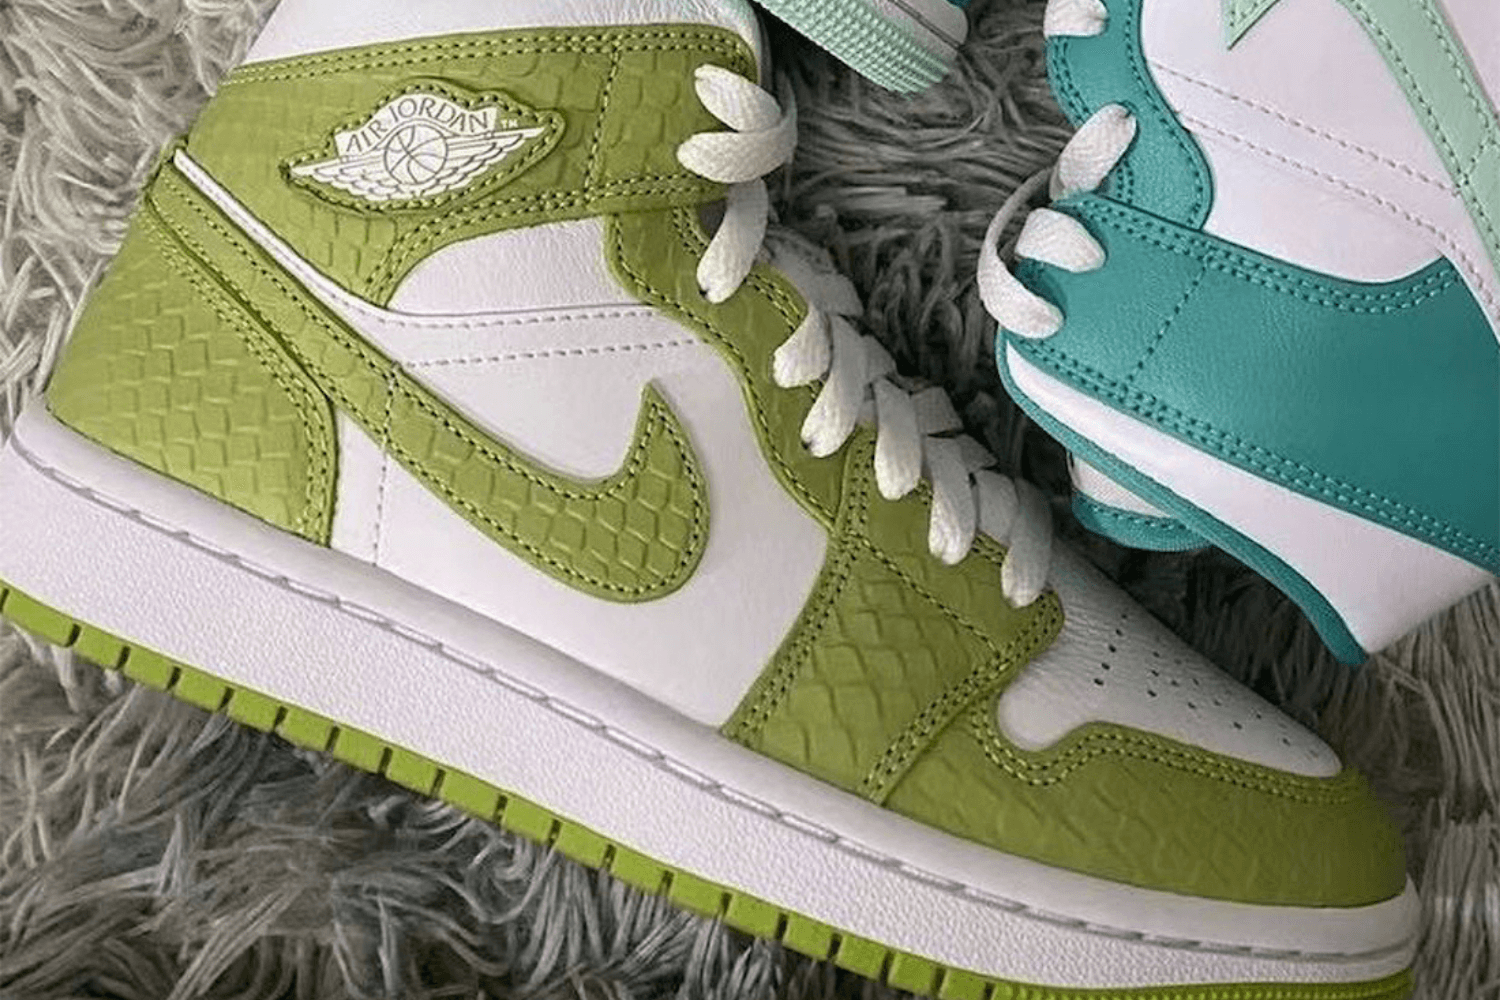 First images of the Air Jordan 1 WMNS Mid 'Green Python'